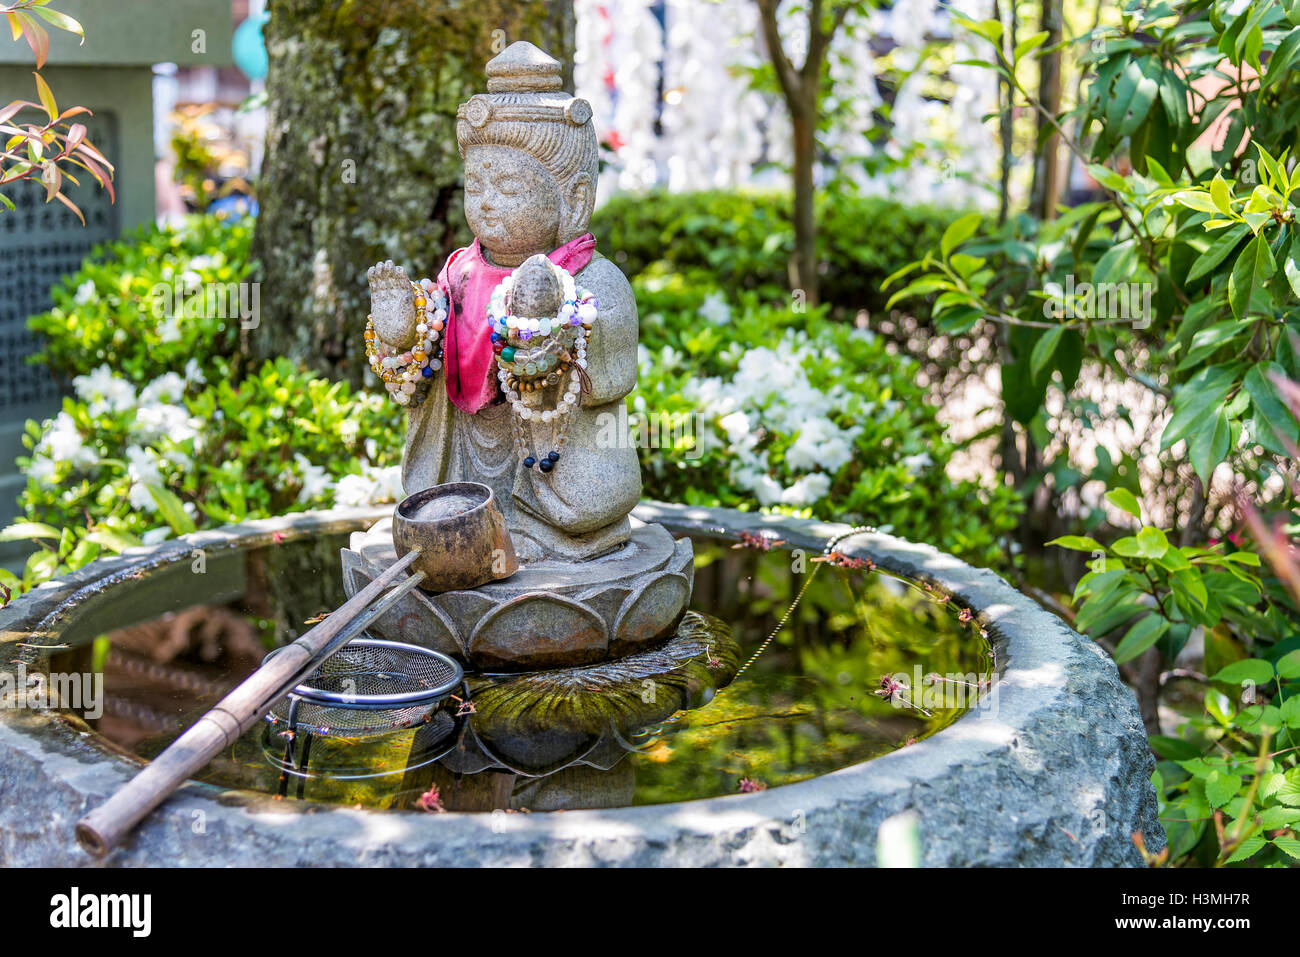 Itsukushima, Japan - April 27, 2014: A purification fountain in Daisho-in temple. Stock Photo